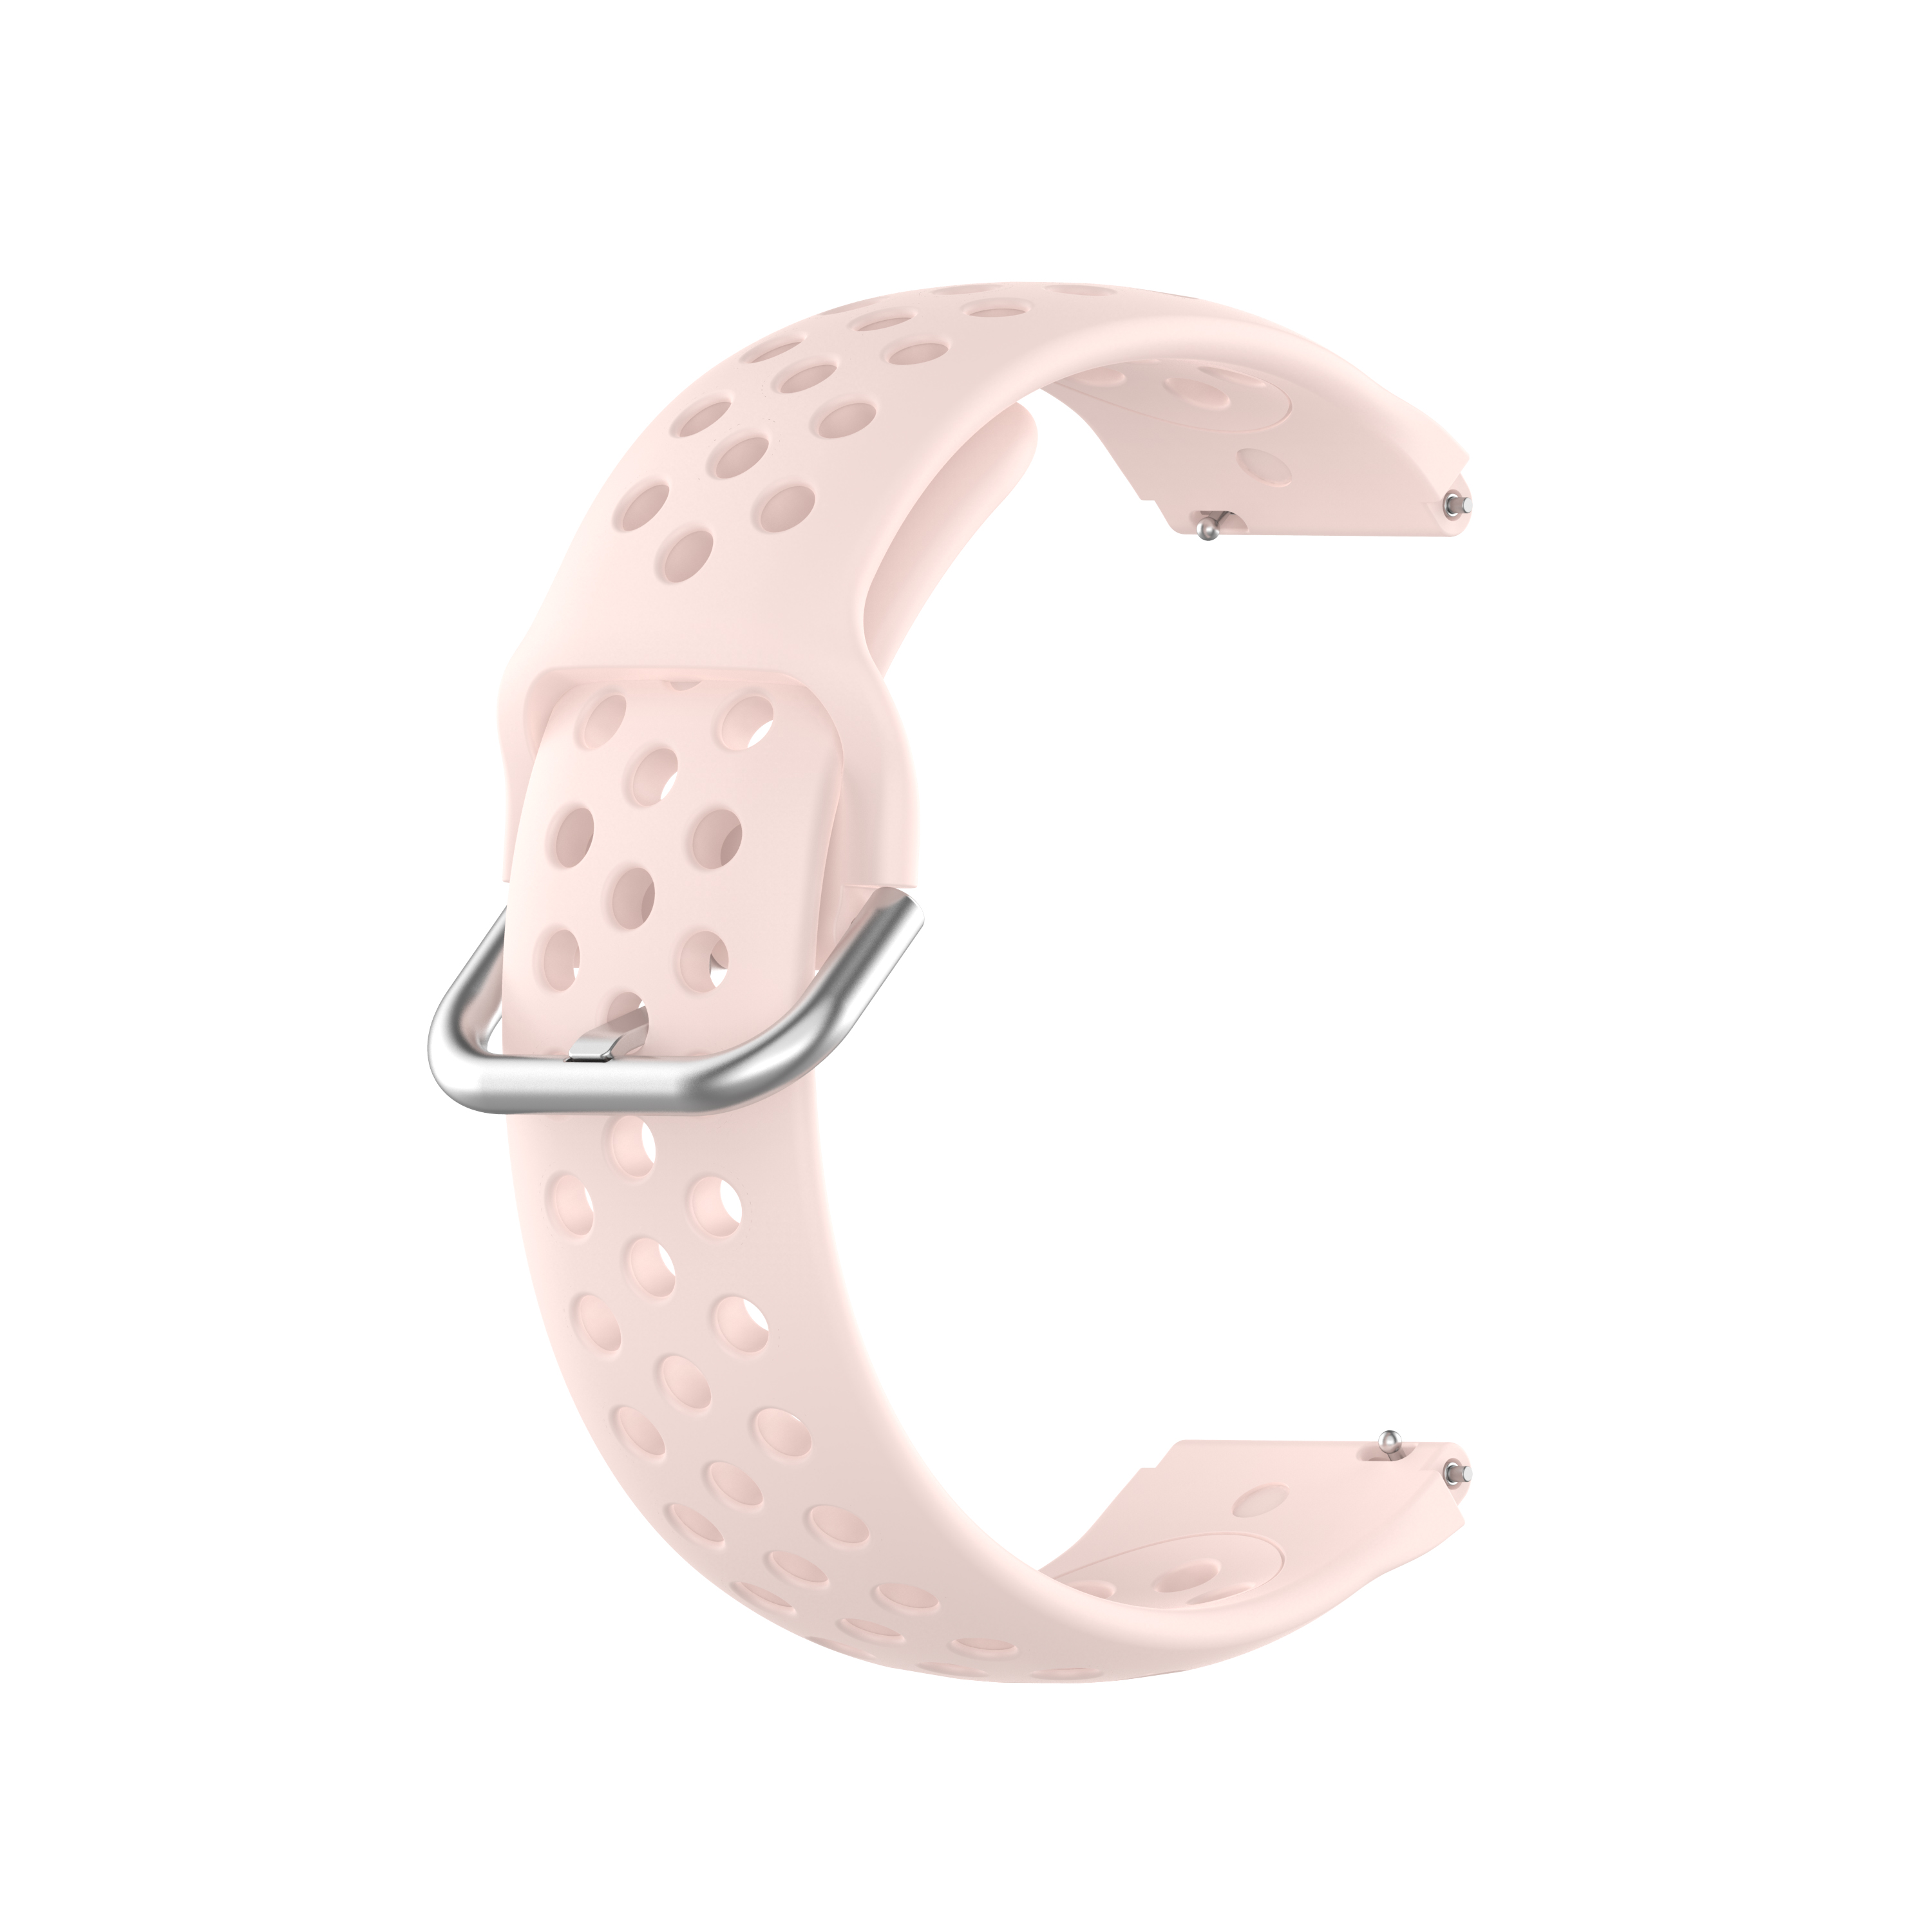 Bakeey-18mm-Stomatal-Silicone-Smart-Watch-Band-Replacement-Strap-For-Xiaomi-Smart-Watch-Non-original-1668524-16